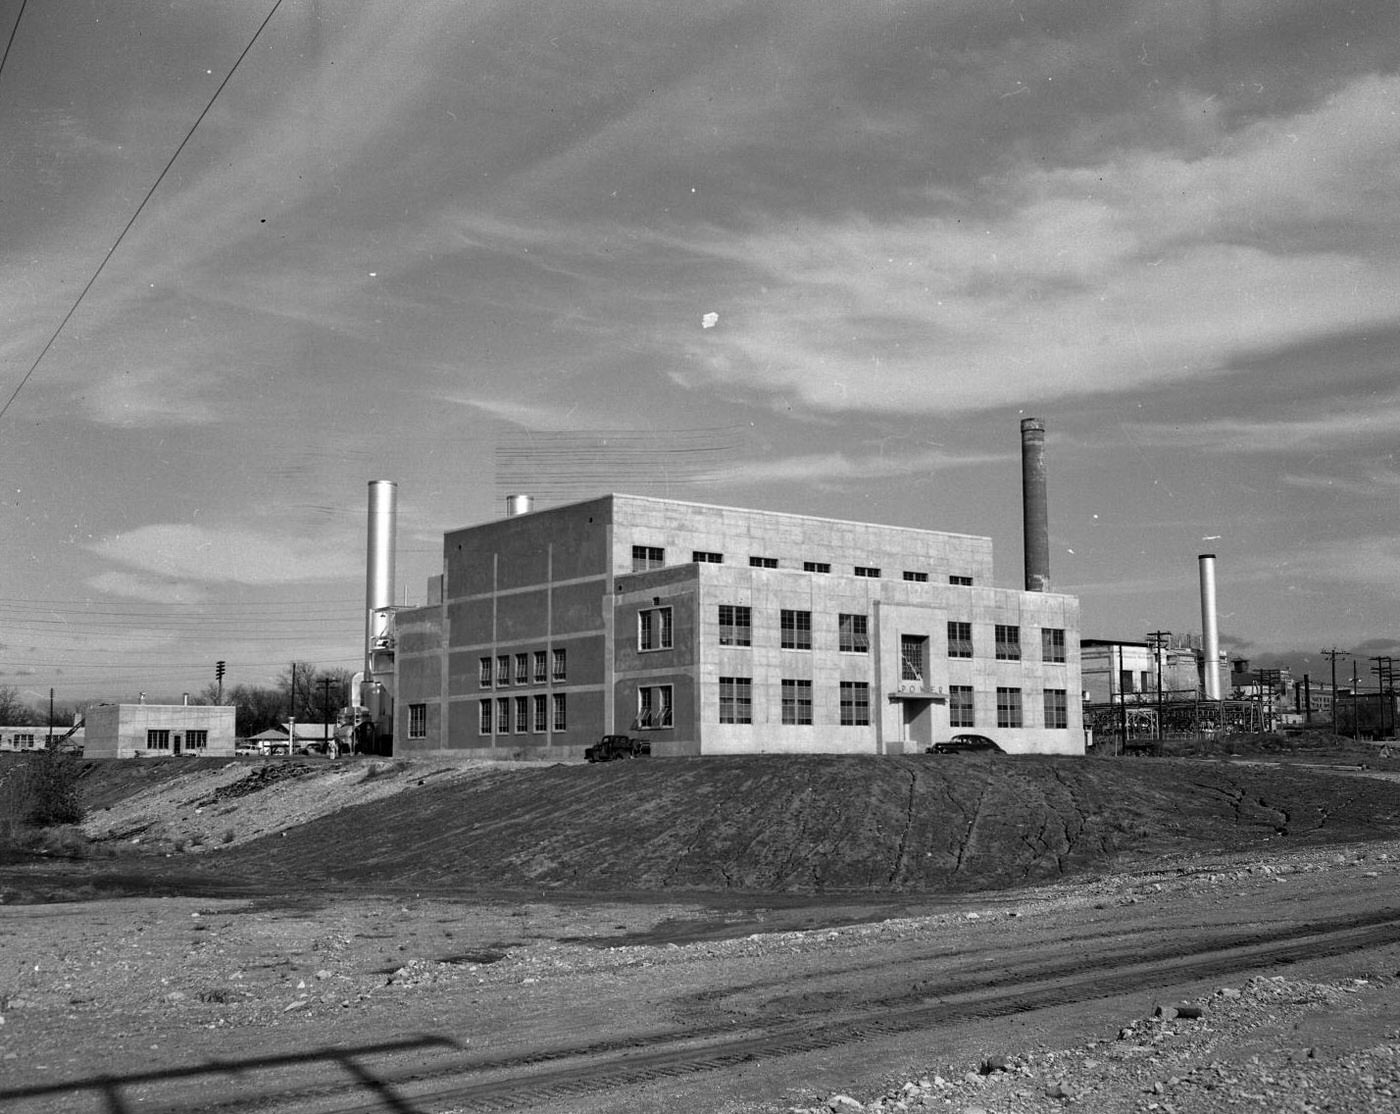 Seaholm Power Plant, Unfinished Surroundings and Parked Cars, 1951.